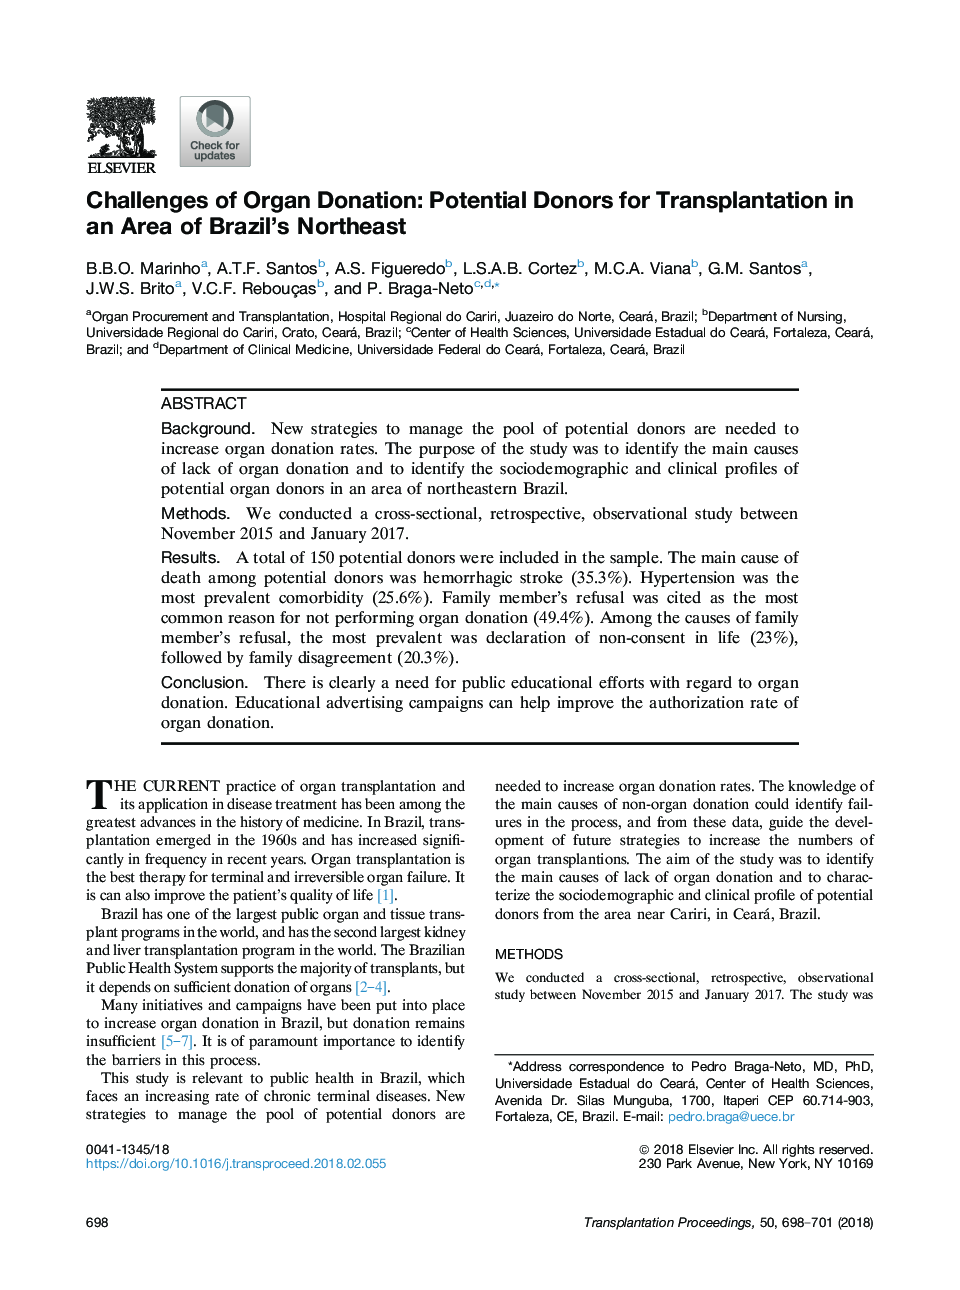 Challenges of Organ Donation: Potential Donors for Transplantation in an Area of Brazil's Northeast